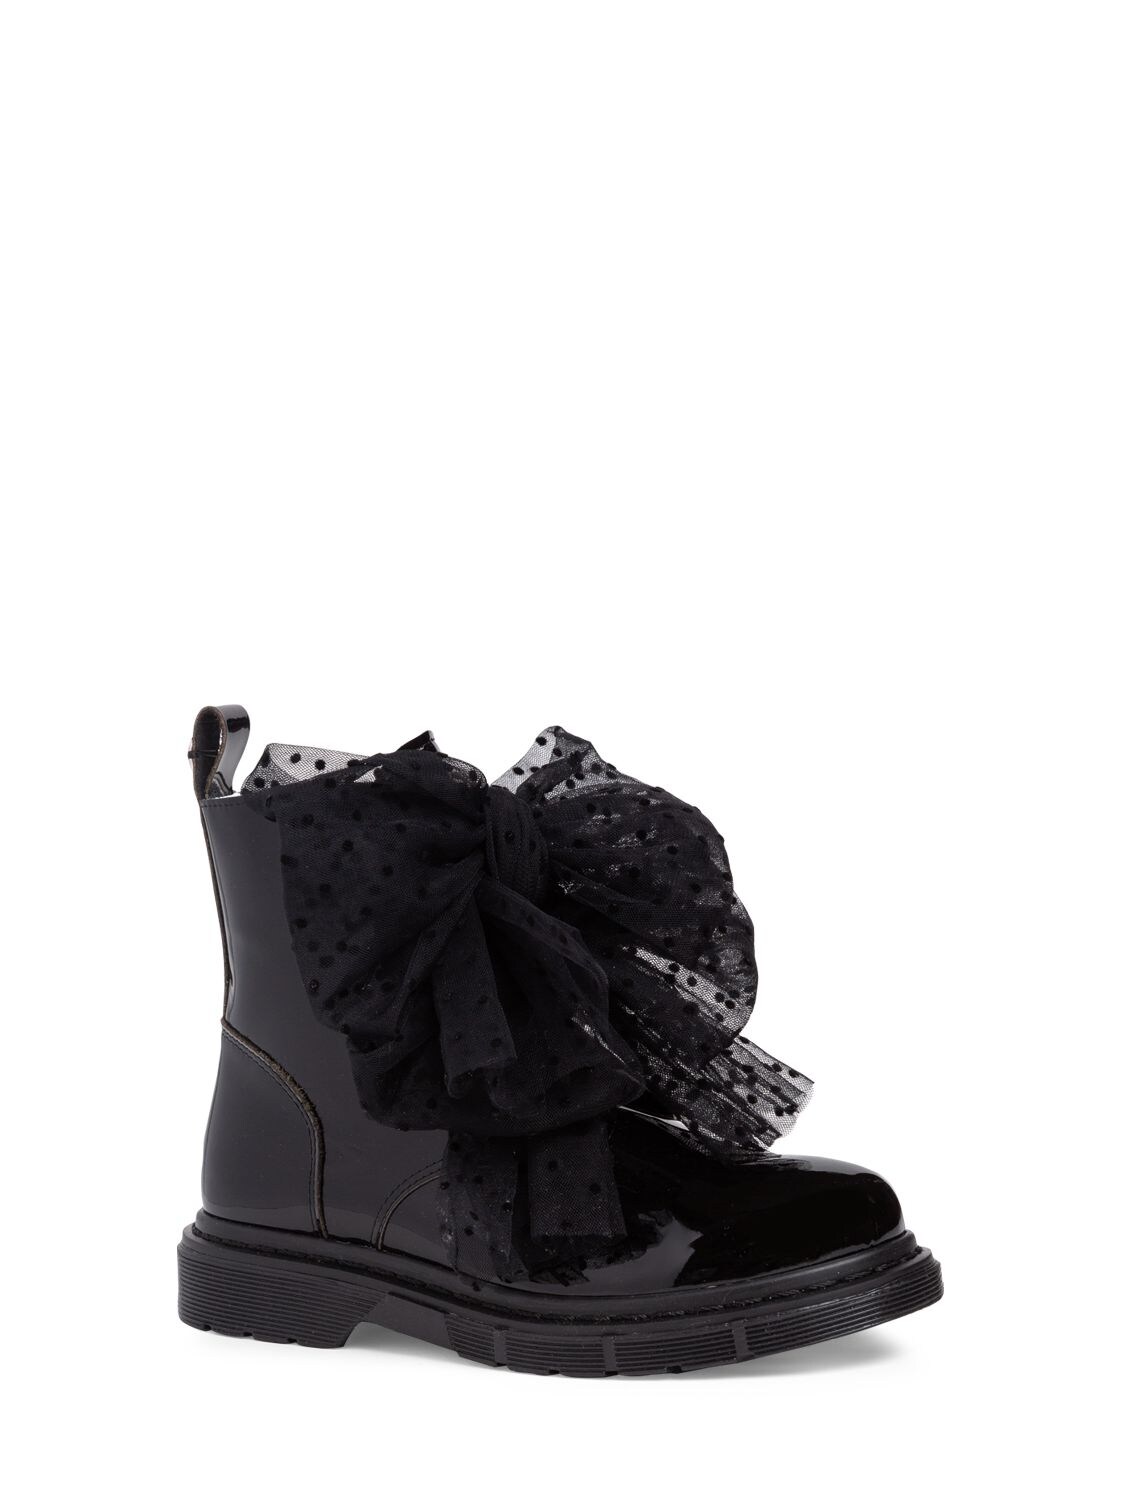 Shop Monnalisa Patent Leather Boots W/ Tulle Bow In Black